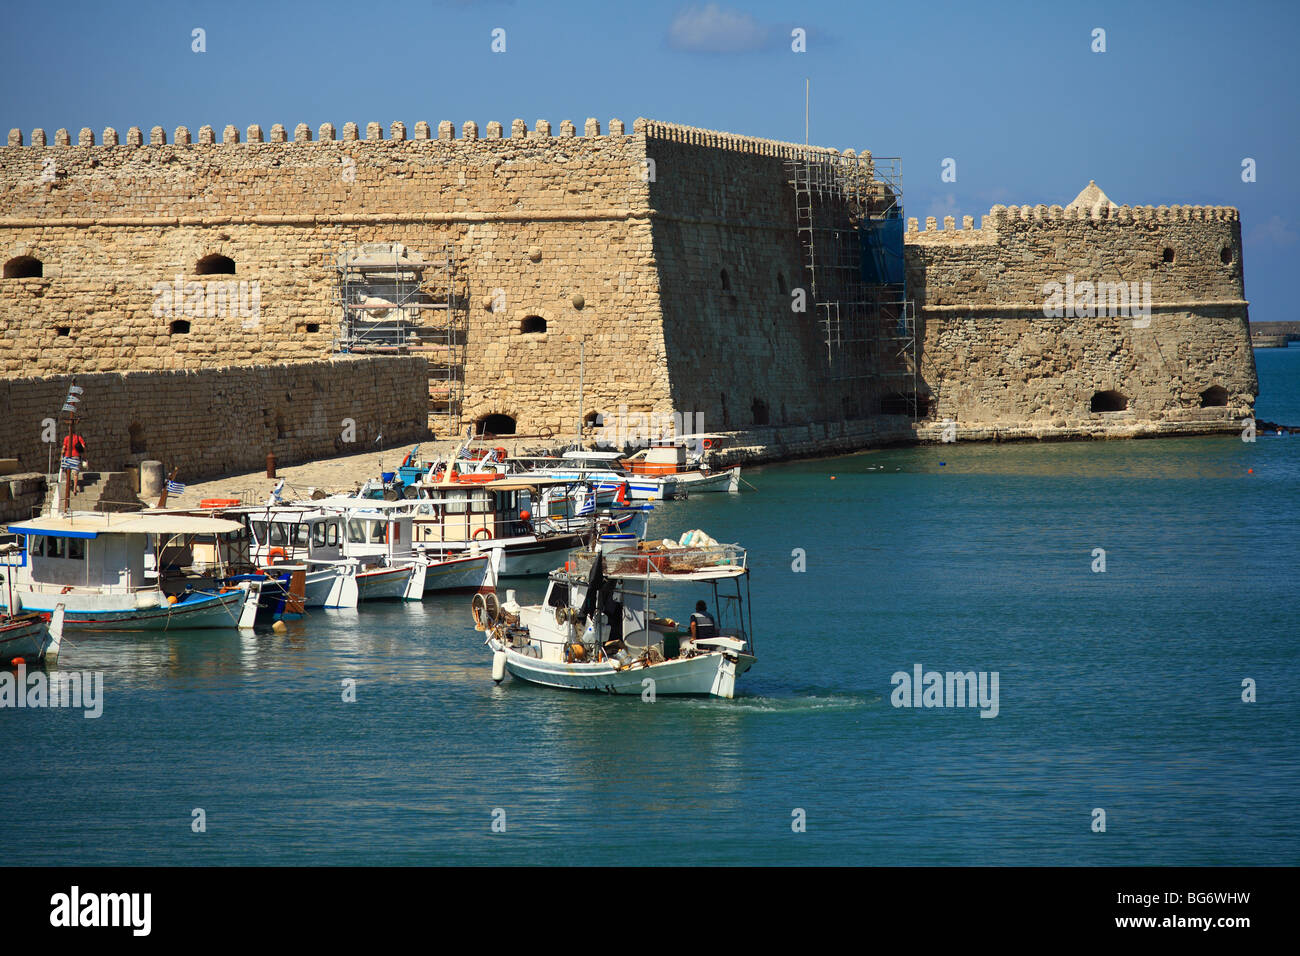 A caique sets off from Heraklion fishing harbour for an evening's fishing, with the Venetian era Koule fortress behind Stock Photo